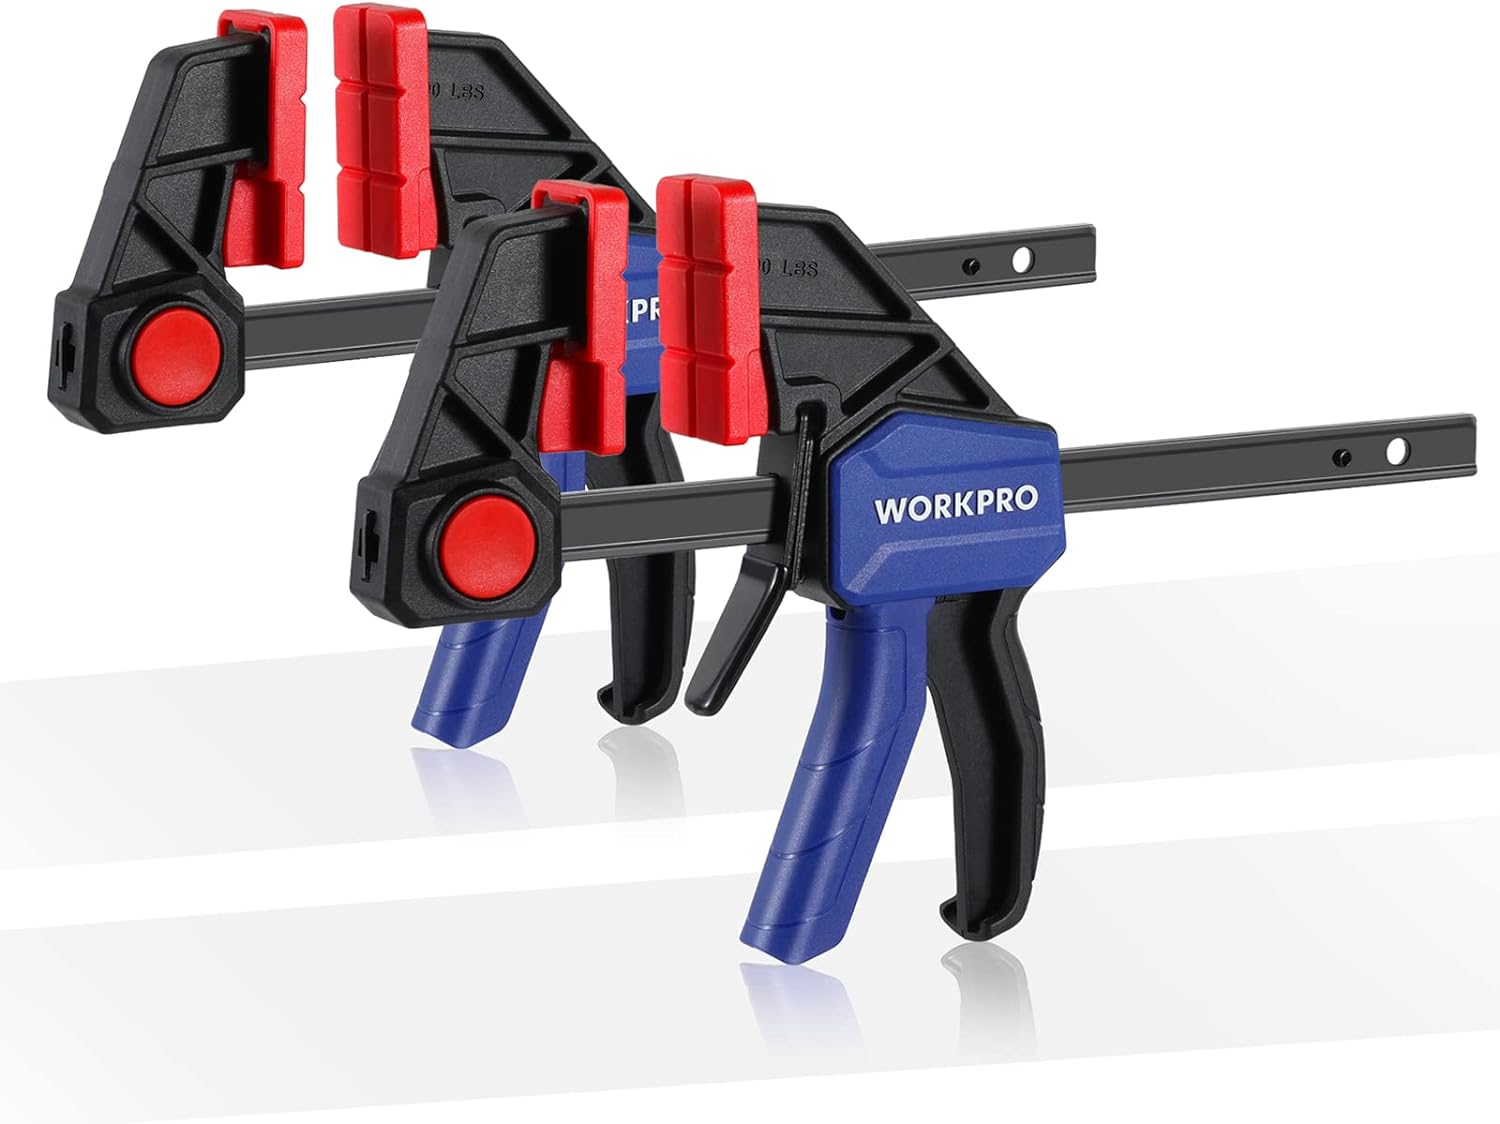 Hangzhou Great Star Industrial WORKPRO 6" Bar Clamps for Woodworking, Medium Duty 300lbs One-Handed Clamp/Spreader, Quick-Clamp F Wood Clamps Set for Han